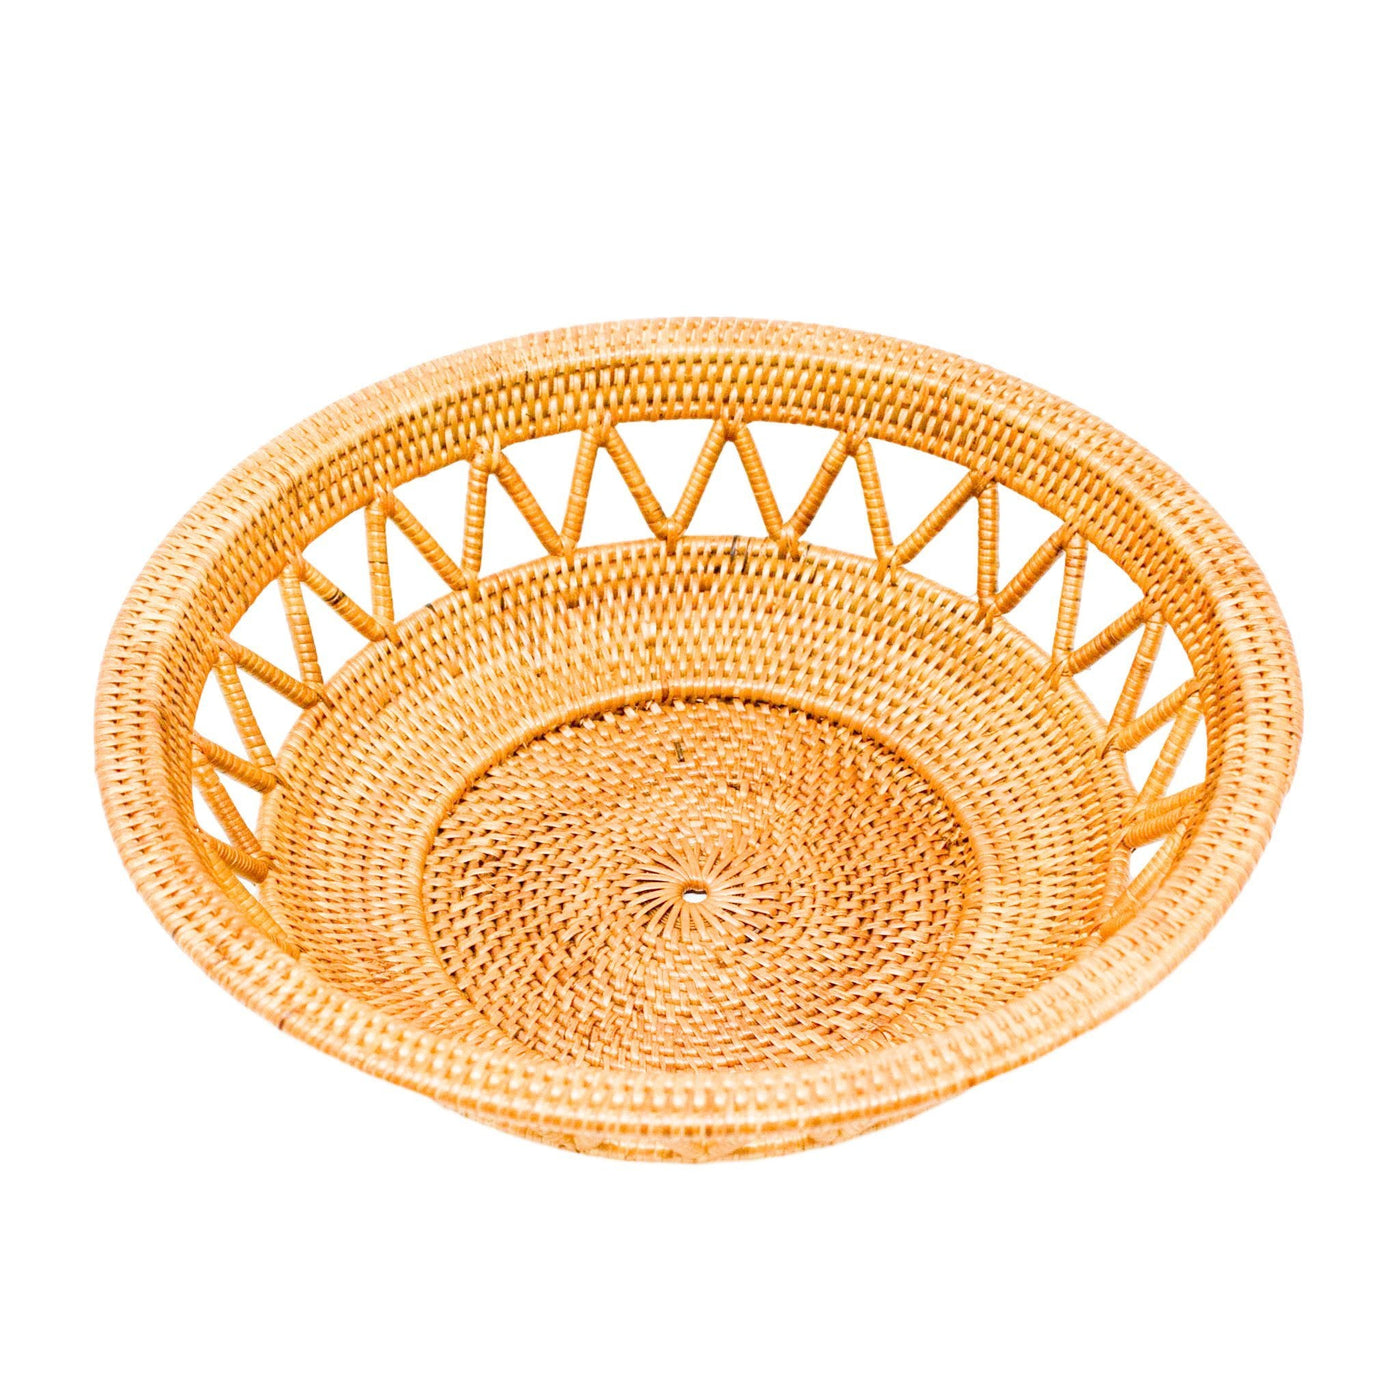 ADELINE WOVEN BOWLS - Set of 3 by POPPY + SAGE